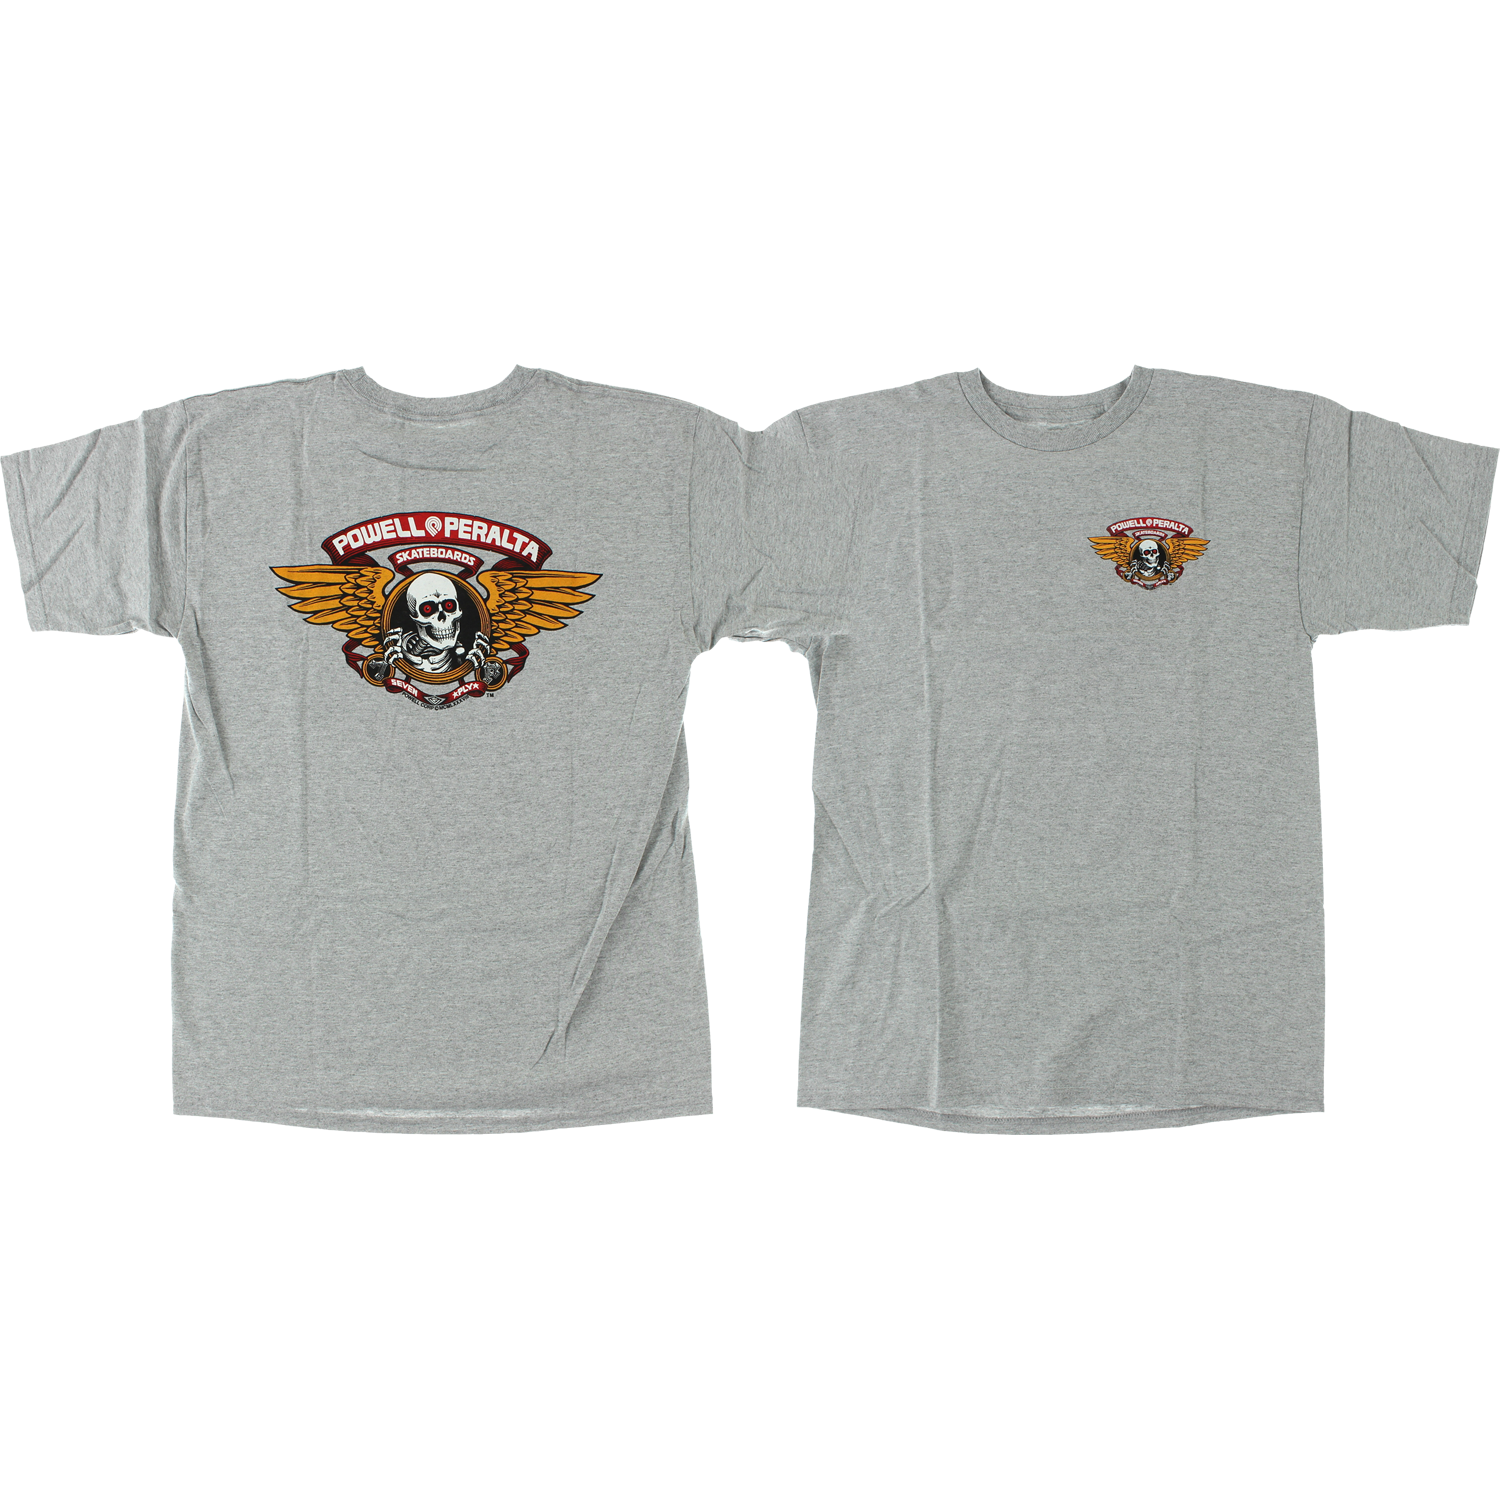 Powell Peralta Winged Ripper T-Shirt - Size: LARGE Heather Grey